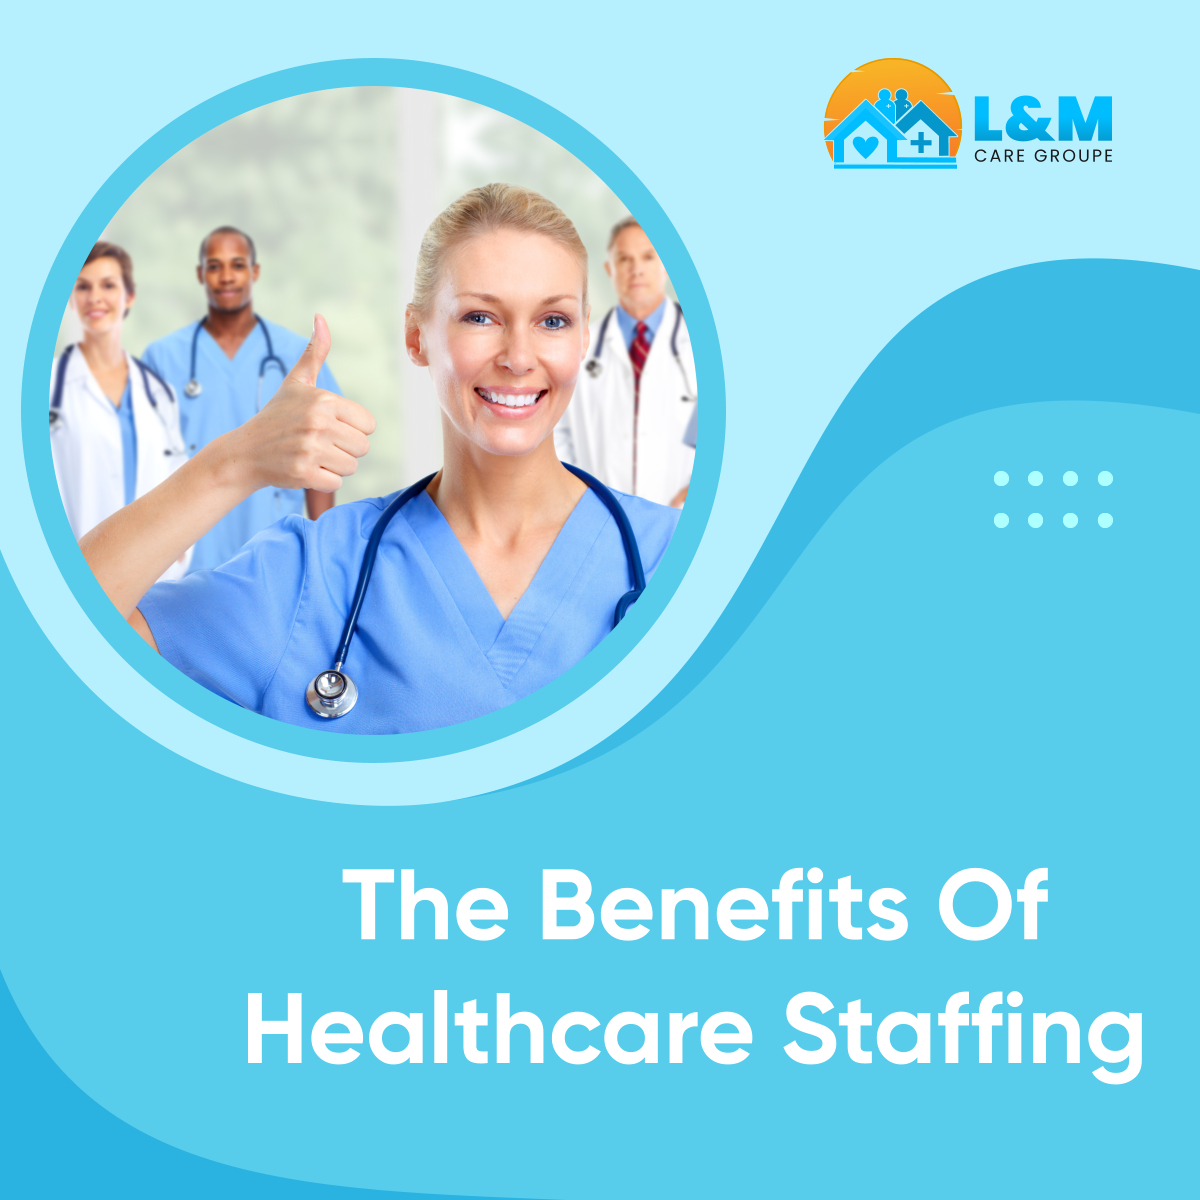 Healthcare staffing provides better access to a large pool of qualified professionals to join your hospital or clinic. It also offers the employer and employee better flexibility regarding schedules. Call us for your staffing needs!

#MerrimackNH #QualifiedProfessionals